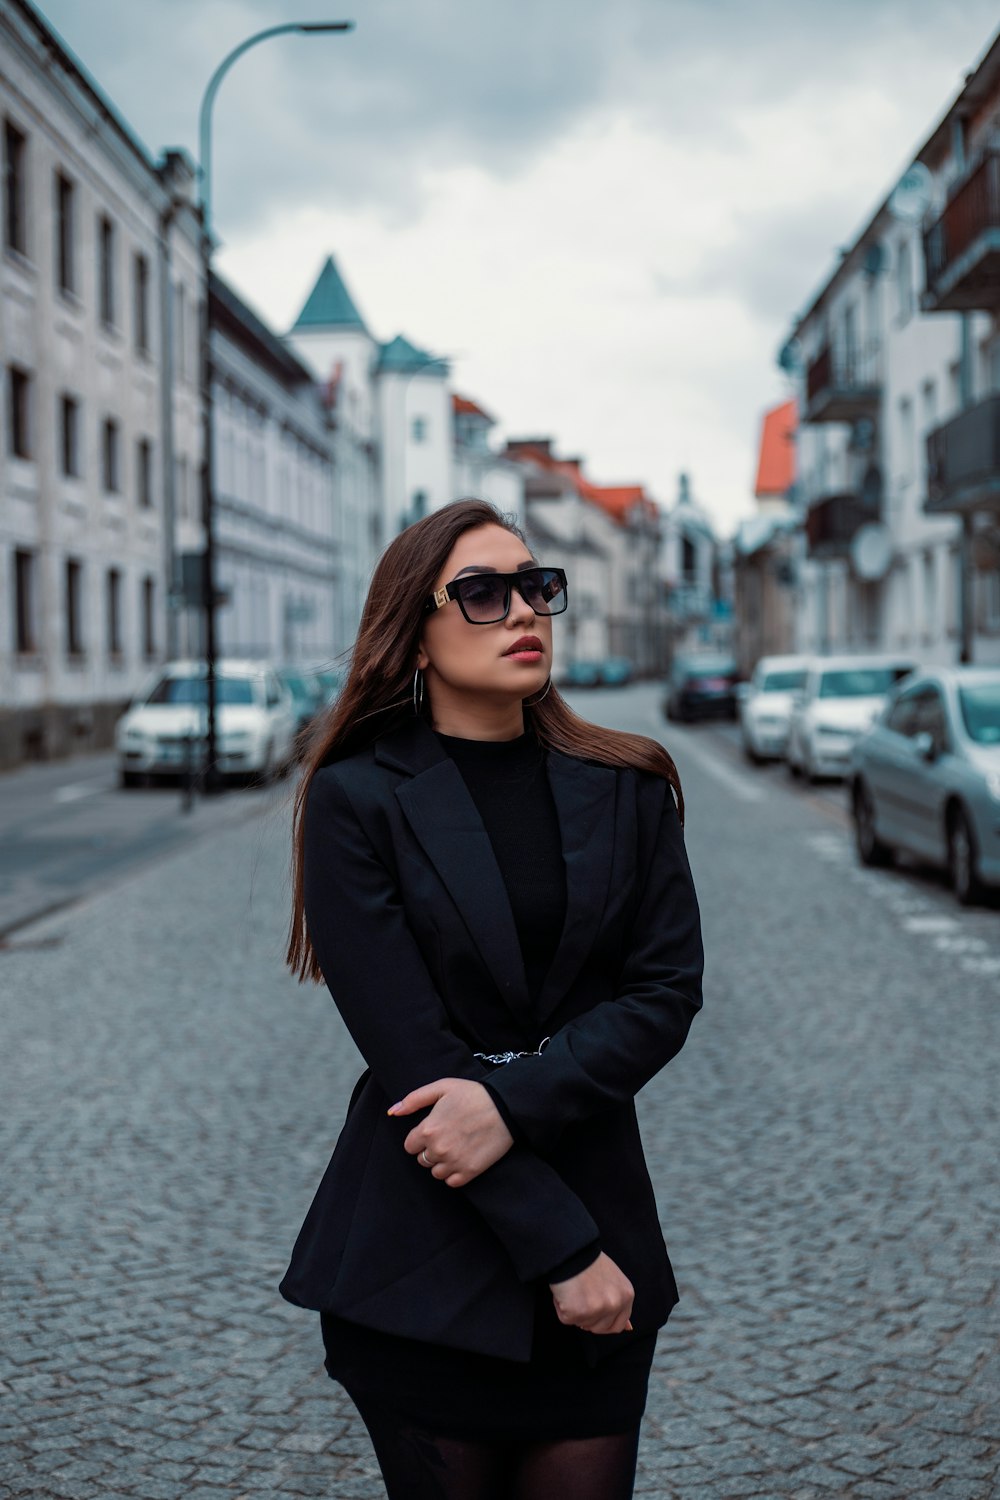 a woman in a suit and sunglasses standing on a cobblestone street